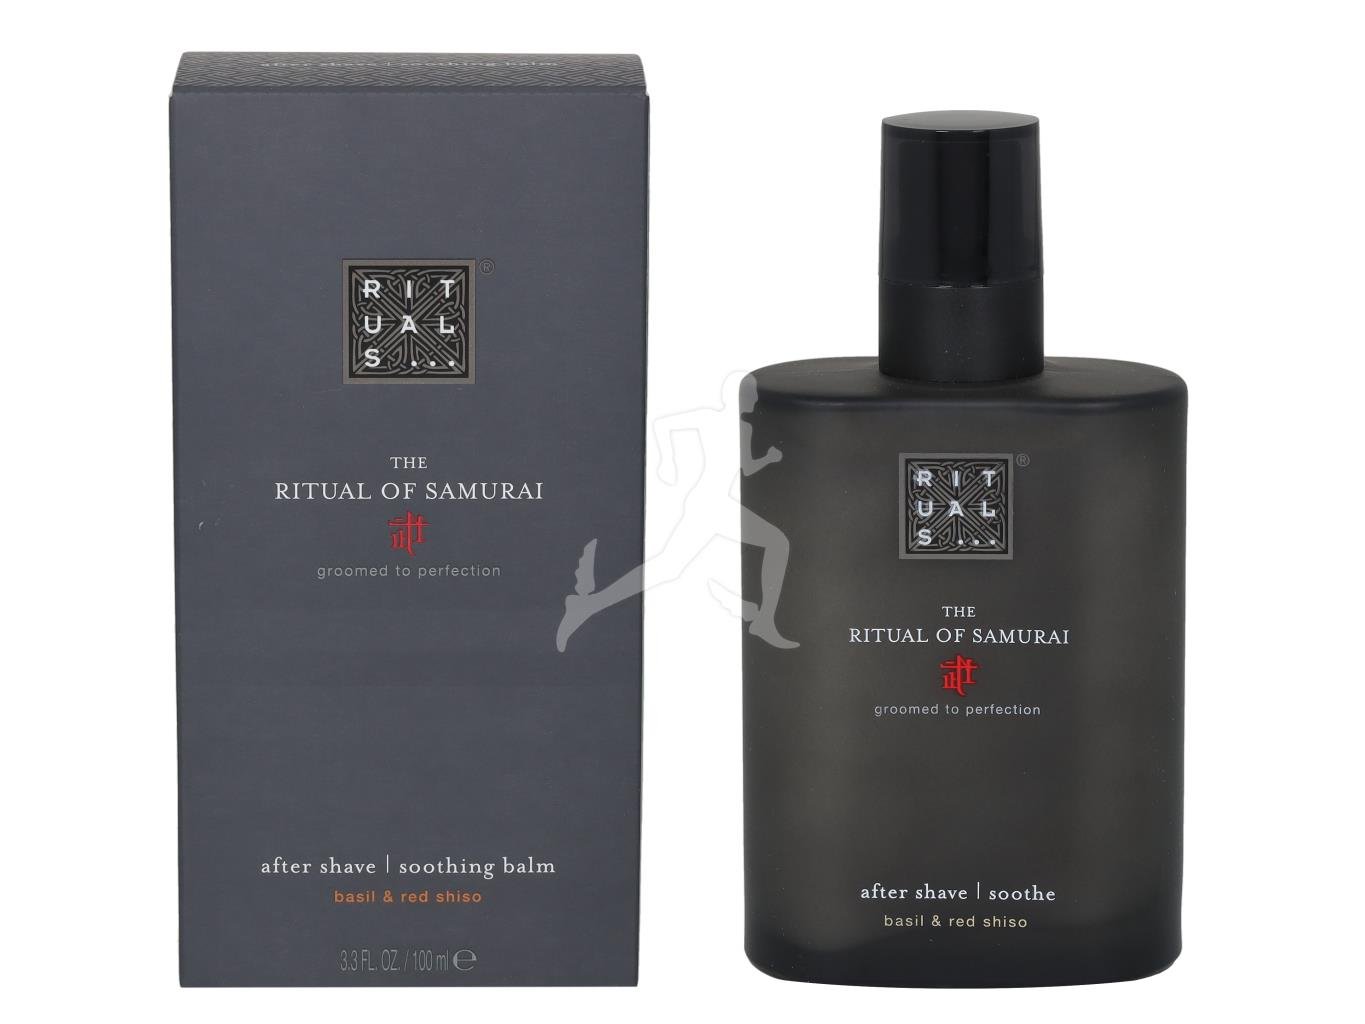 Rituals Samurai After Shave Soothing Balm